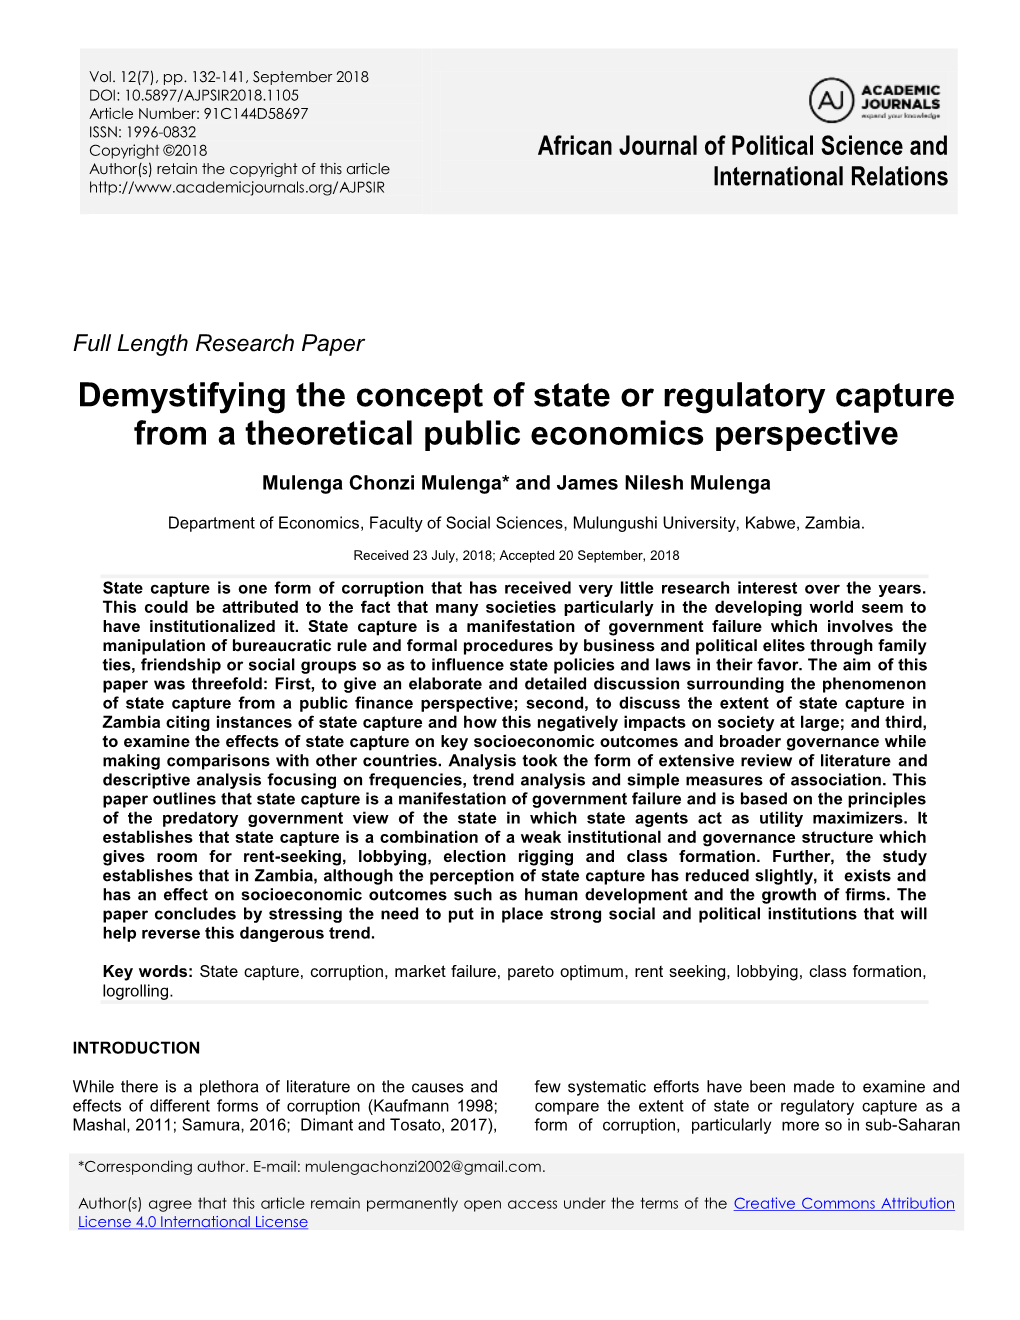 Demystifying the Concept of State Or Regulatory Capture from a Theoretical Public Economics Perspective